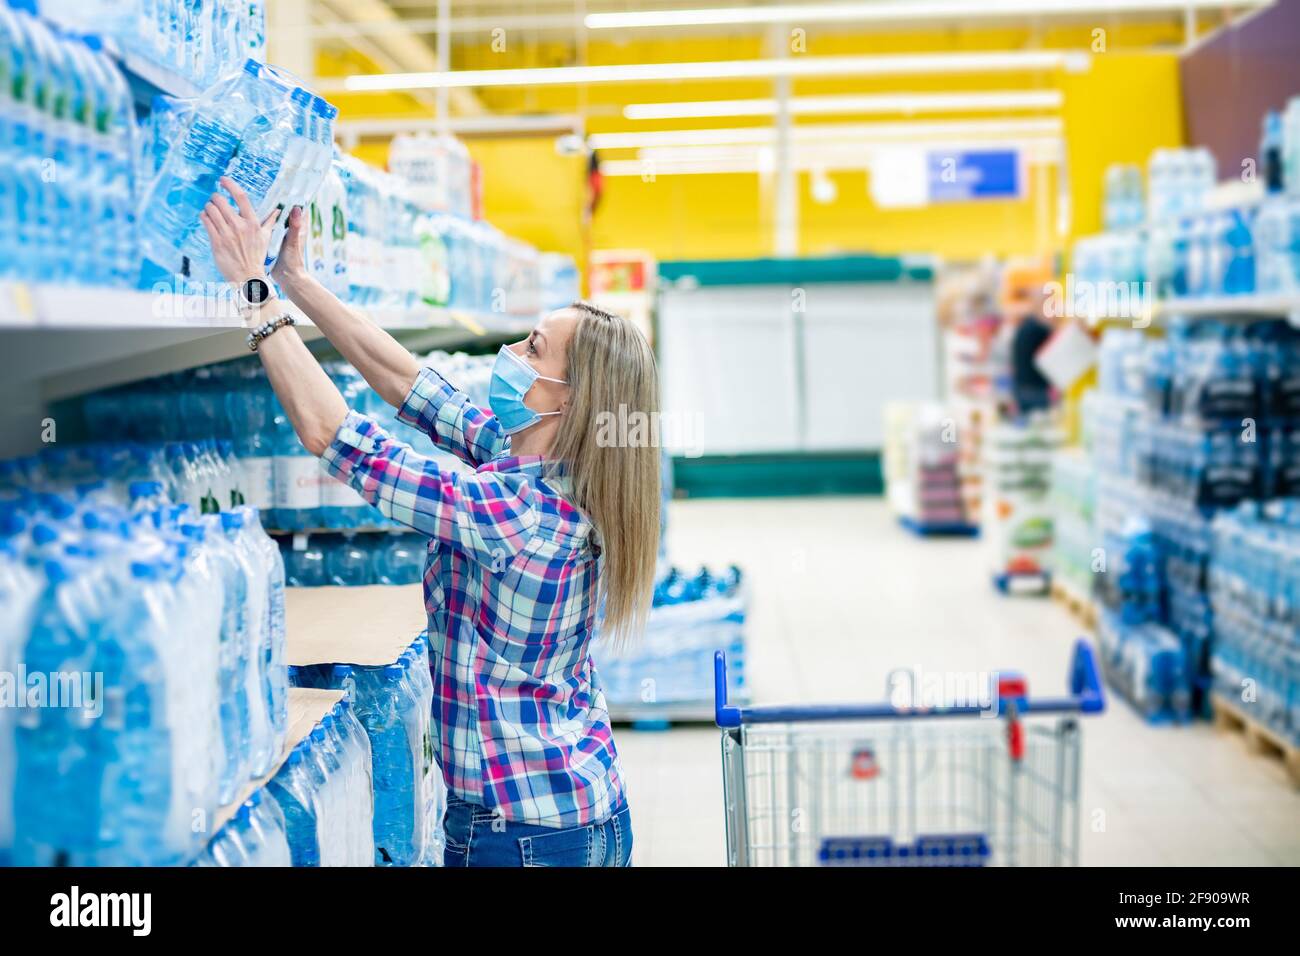 Woman in a medical mask buys clean water in a supermarket. Coronavirus pandemic. Stock Photo